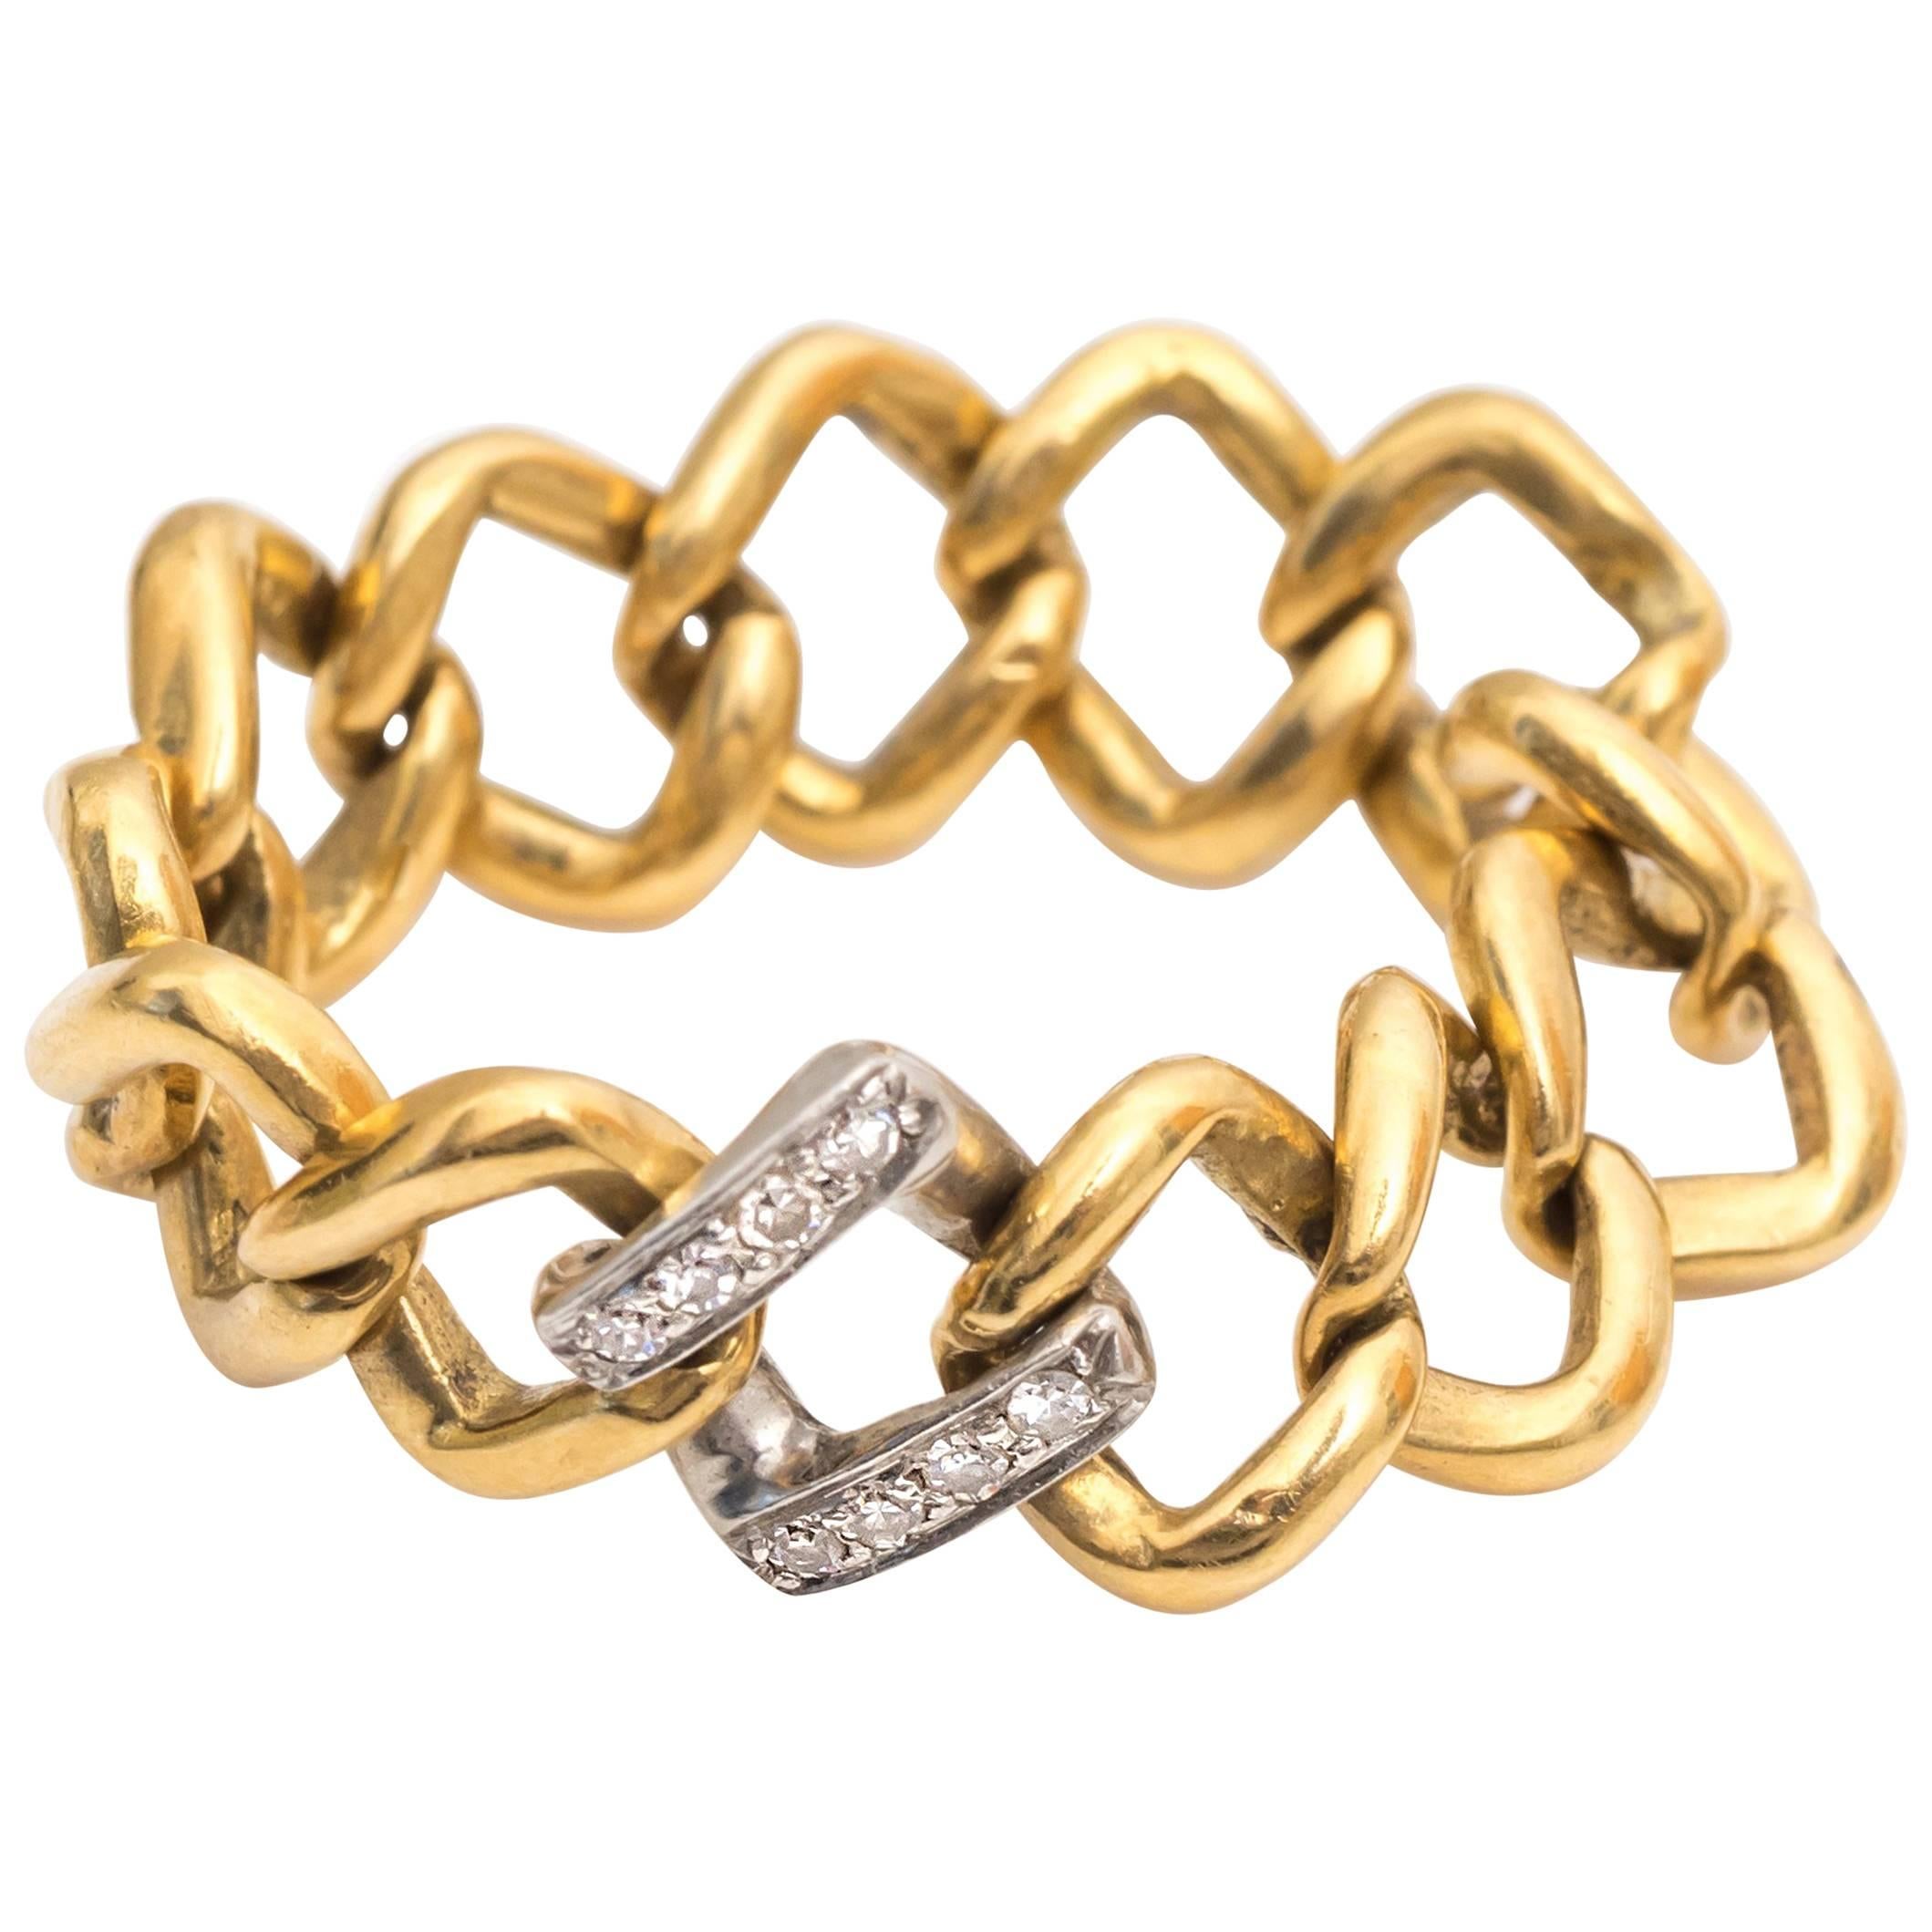 1980s Two-Tone Chain Link Ring with Diamonds